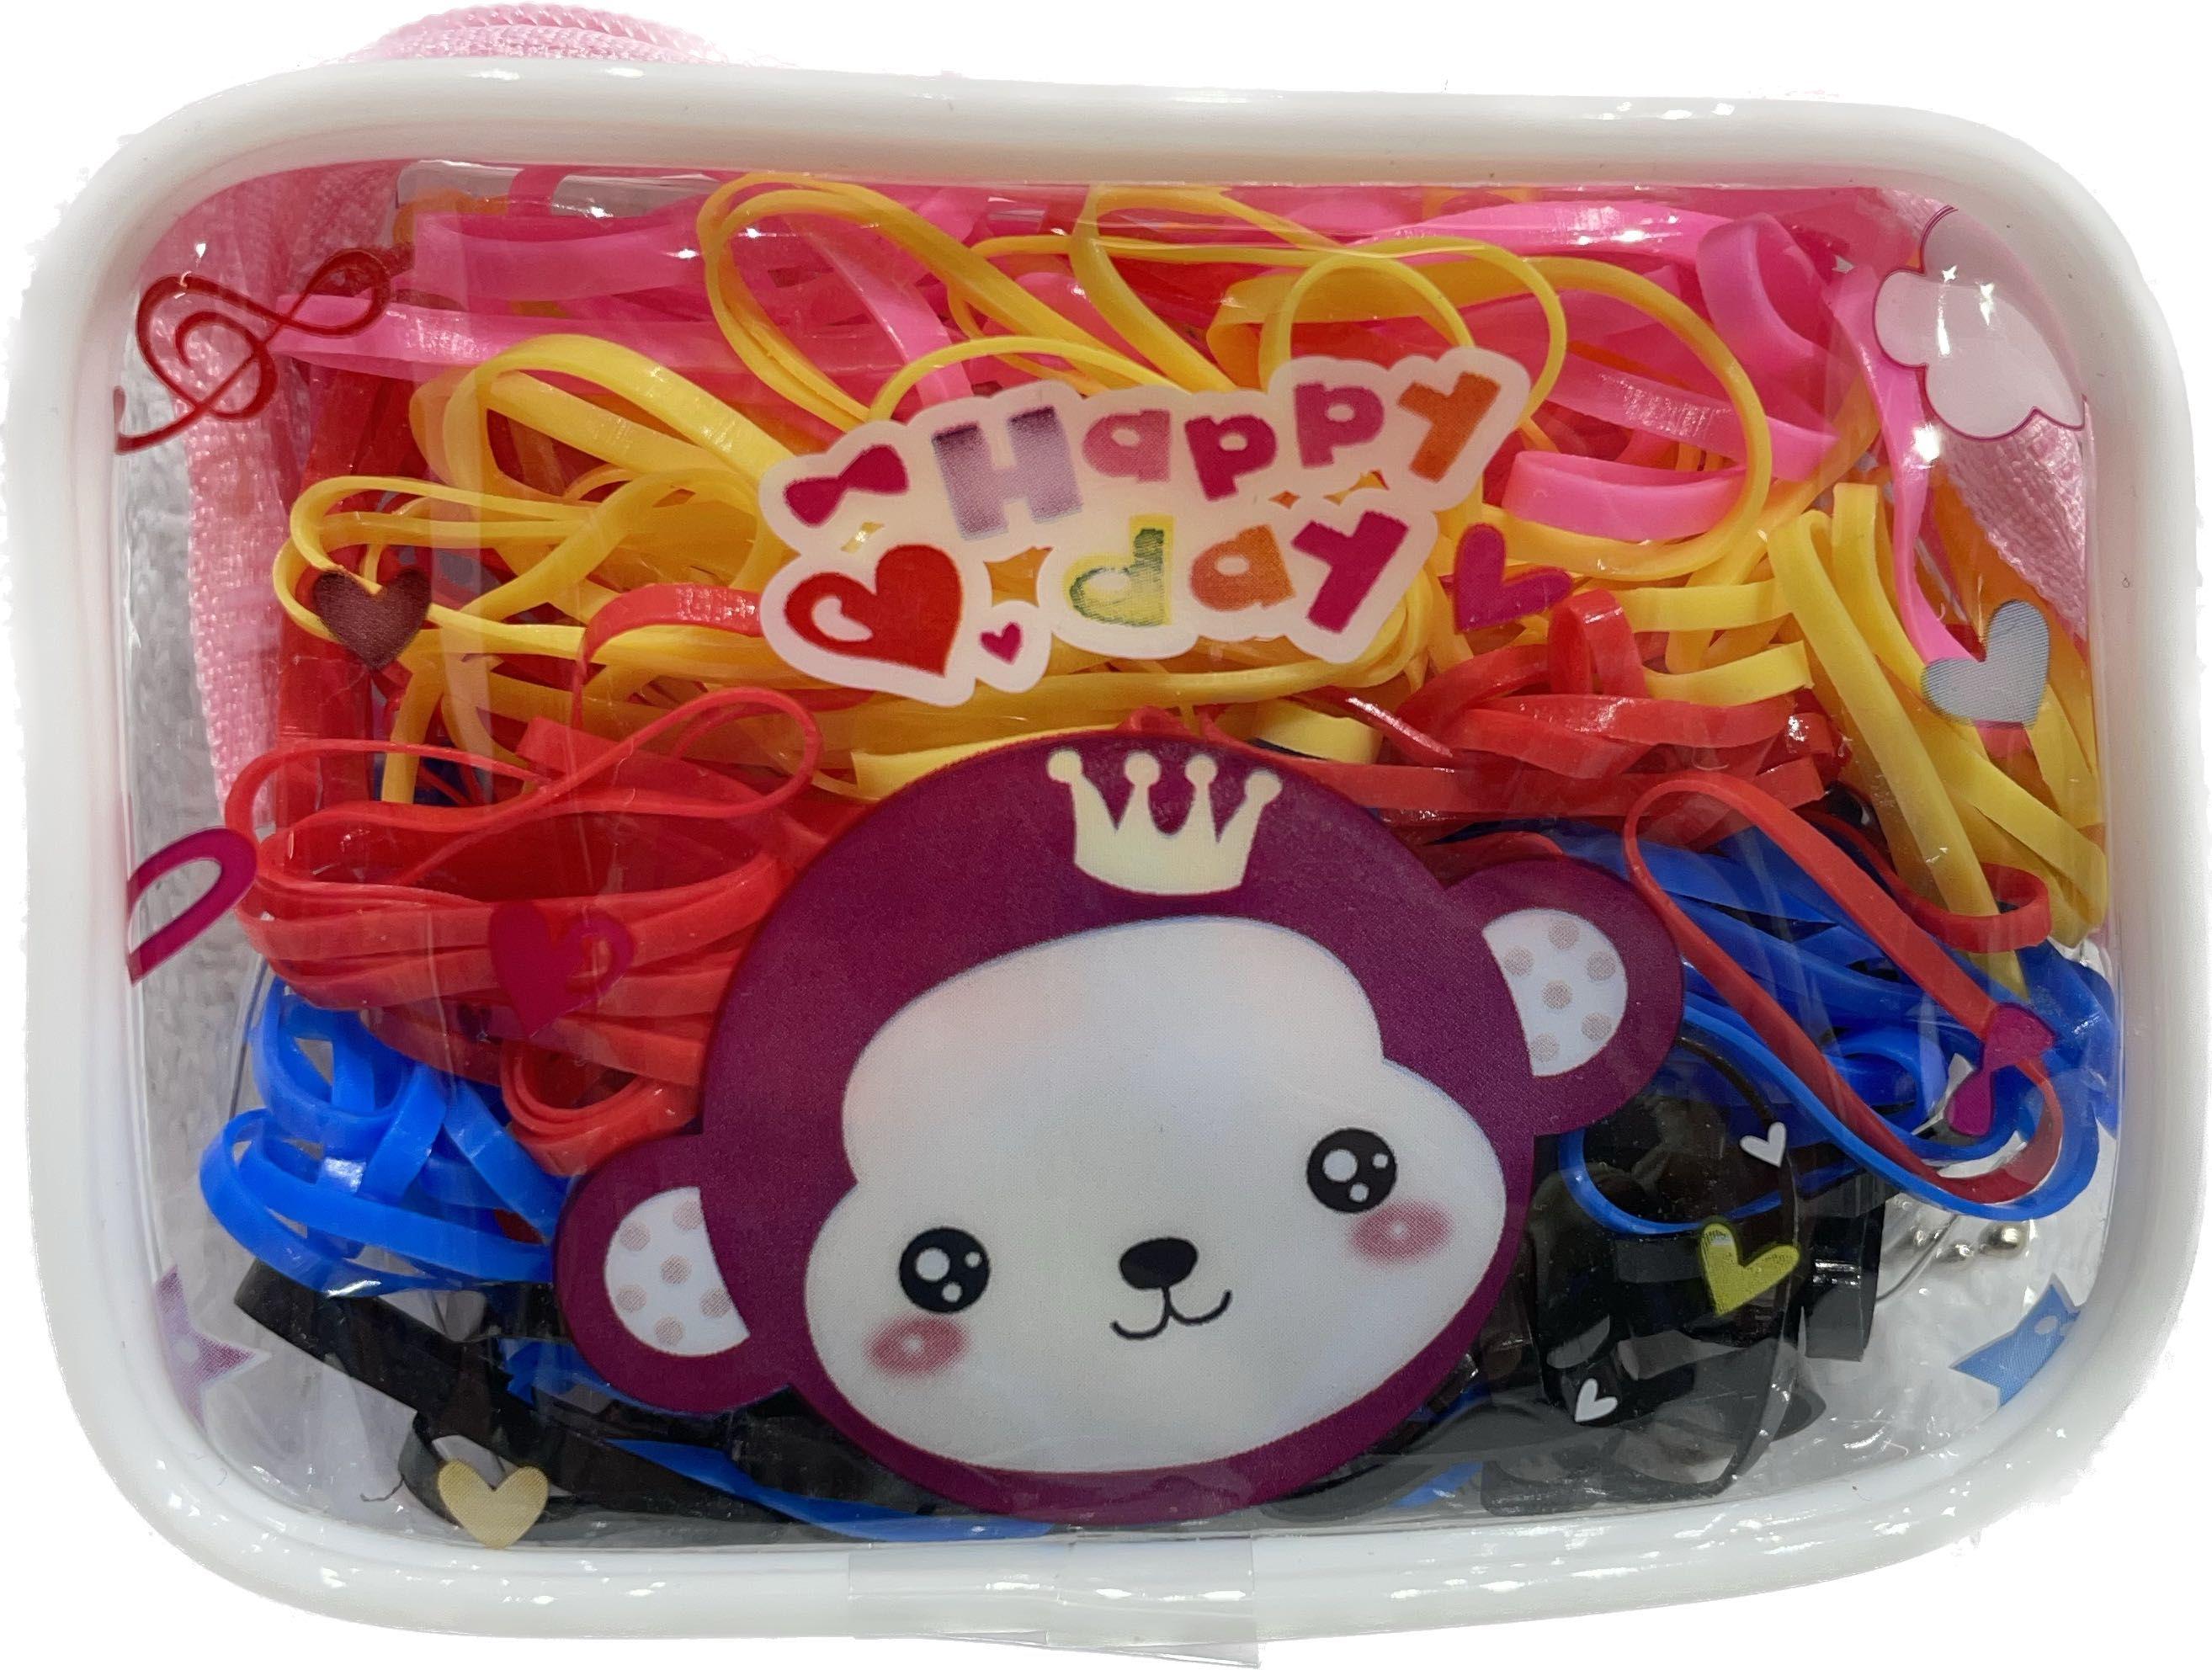 A set of rubber bands for hair recipes, mix of colors - type 7